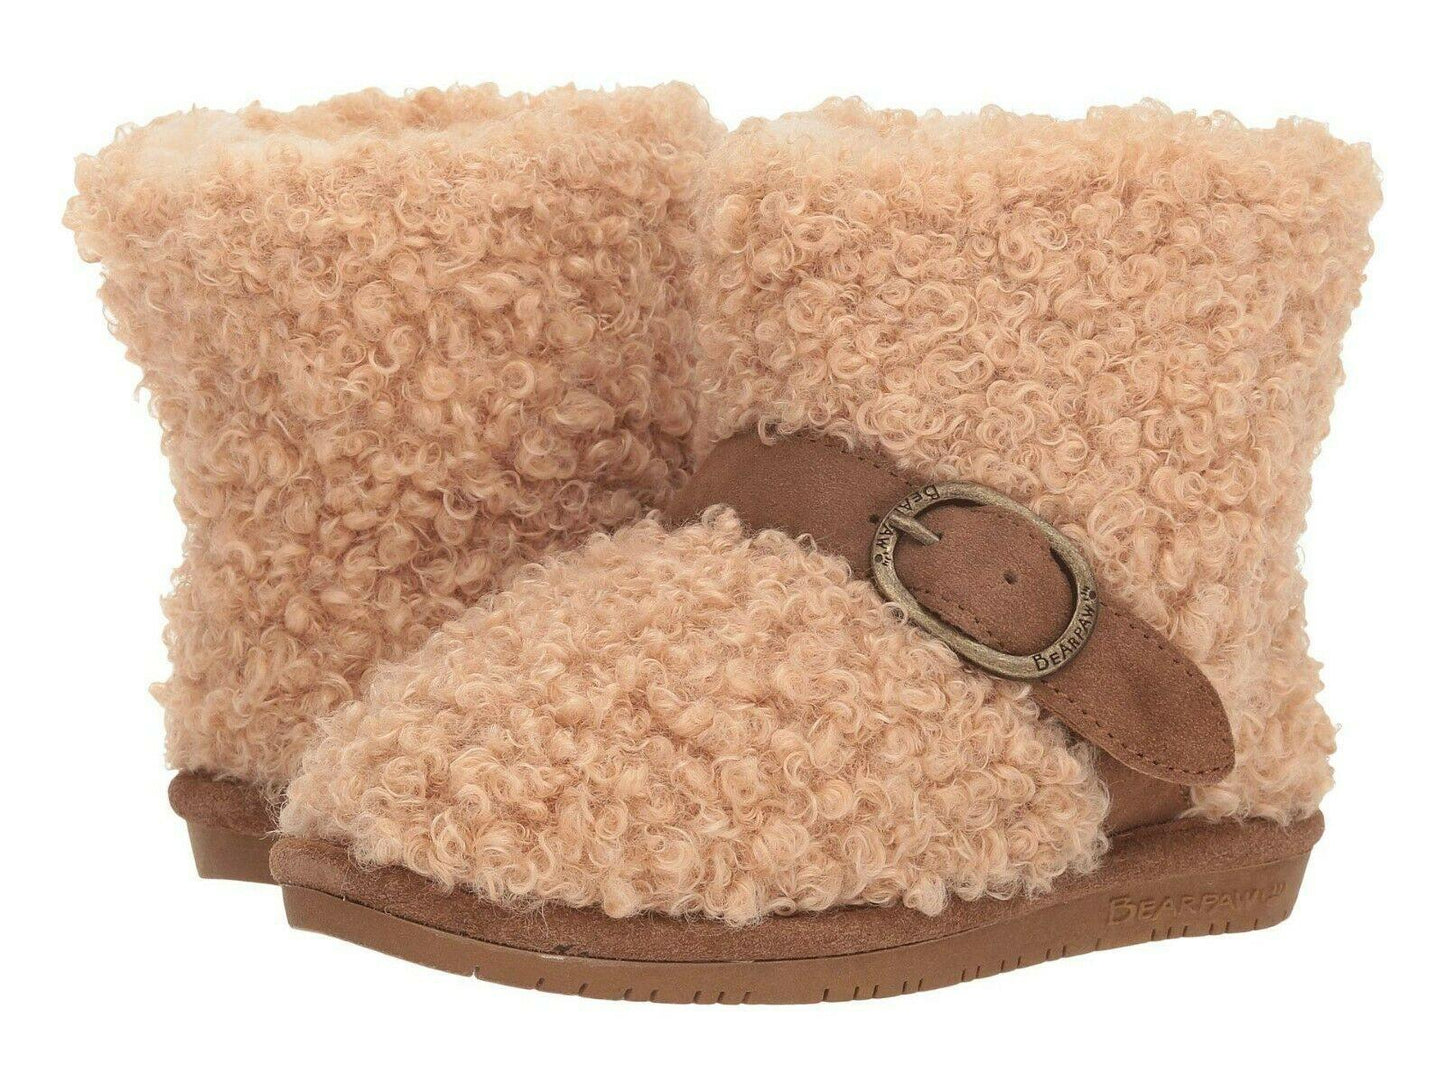 Bearpaw Treasure Taupe Comfortable Wool Blend Winter Girls Boots 2 Little Kid - SVNYFancy